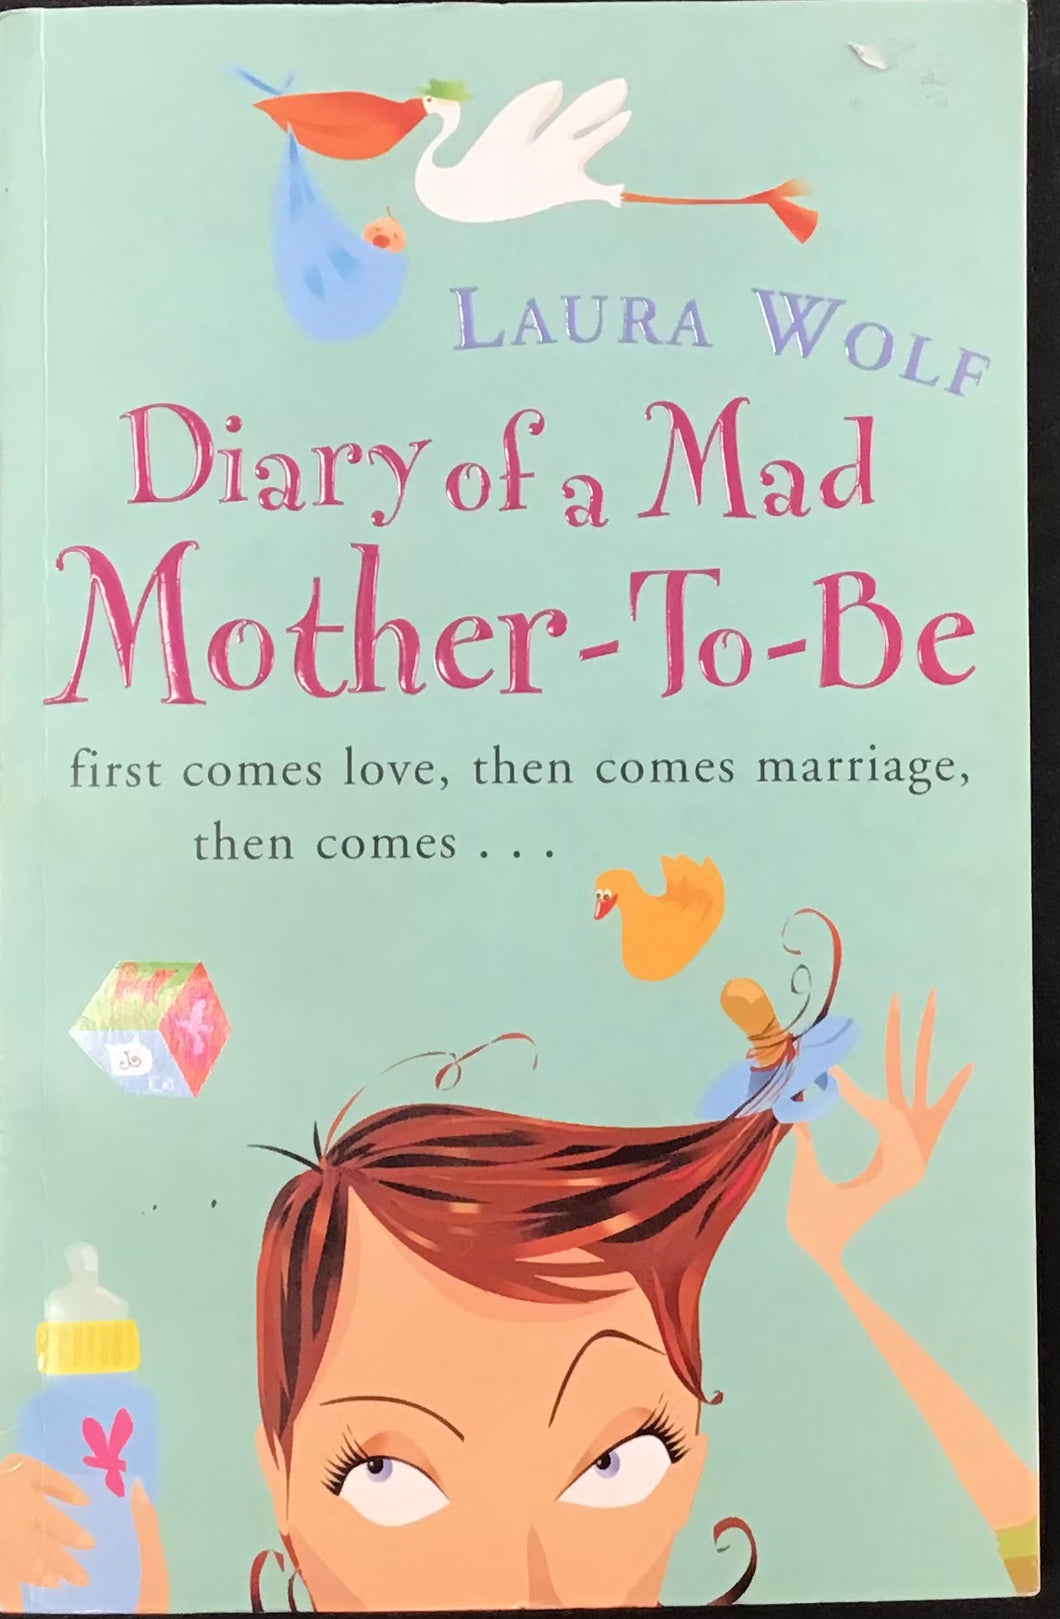 Diary of a Mad Mother-to-be- Laura Wolf